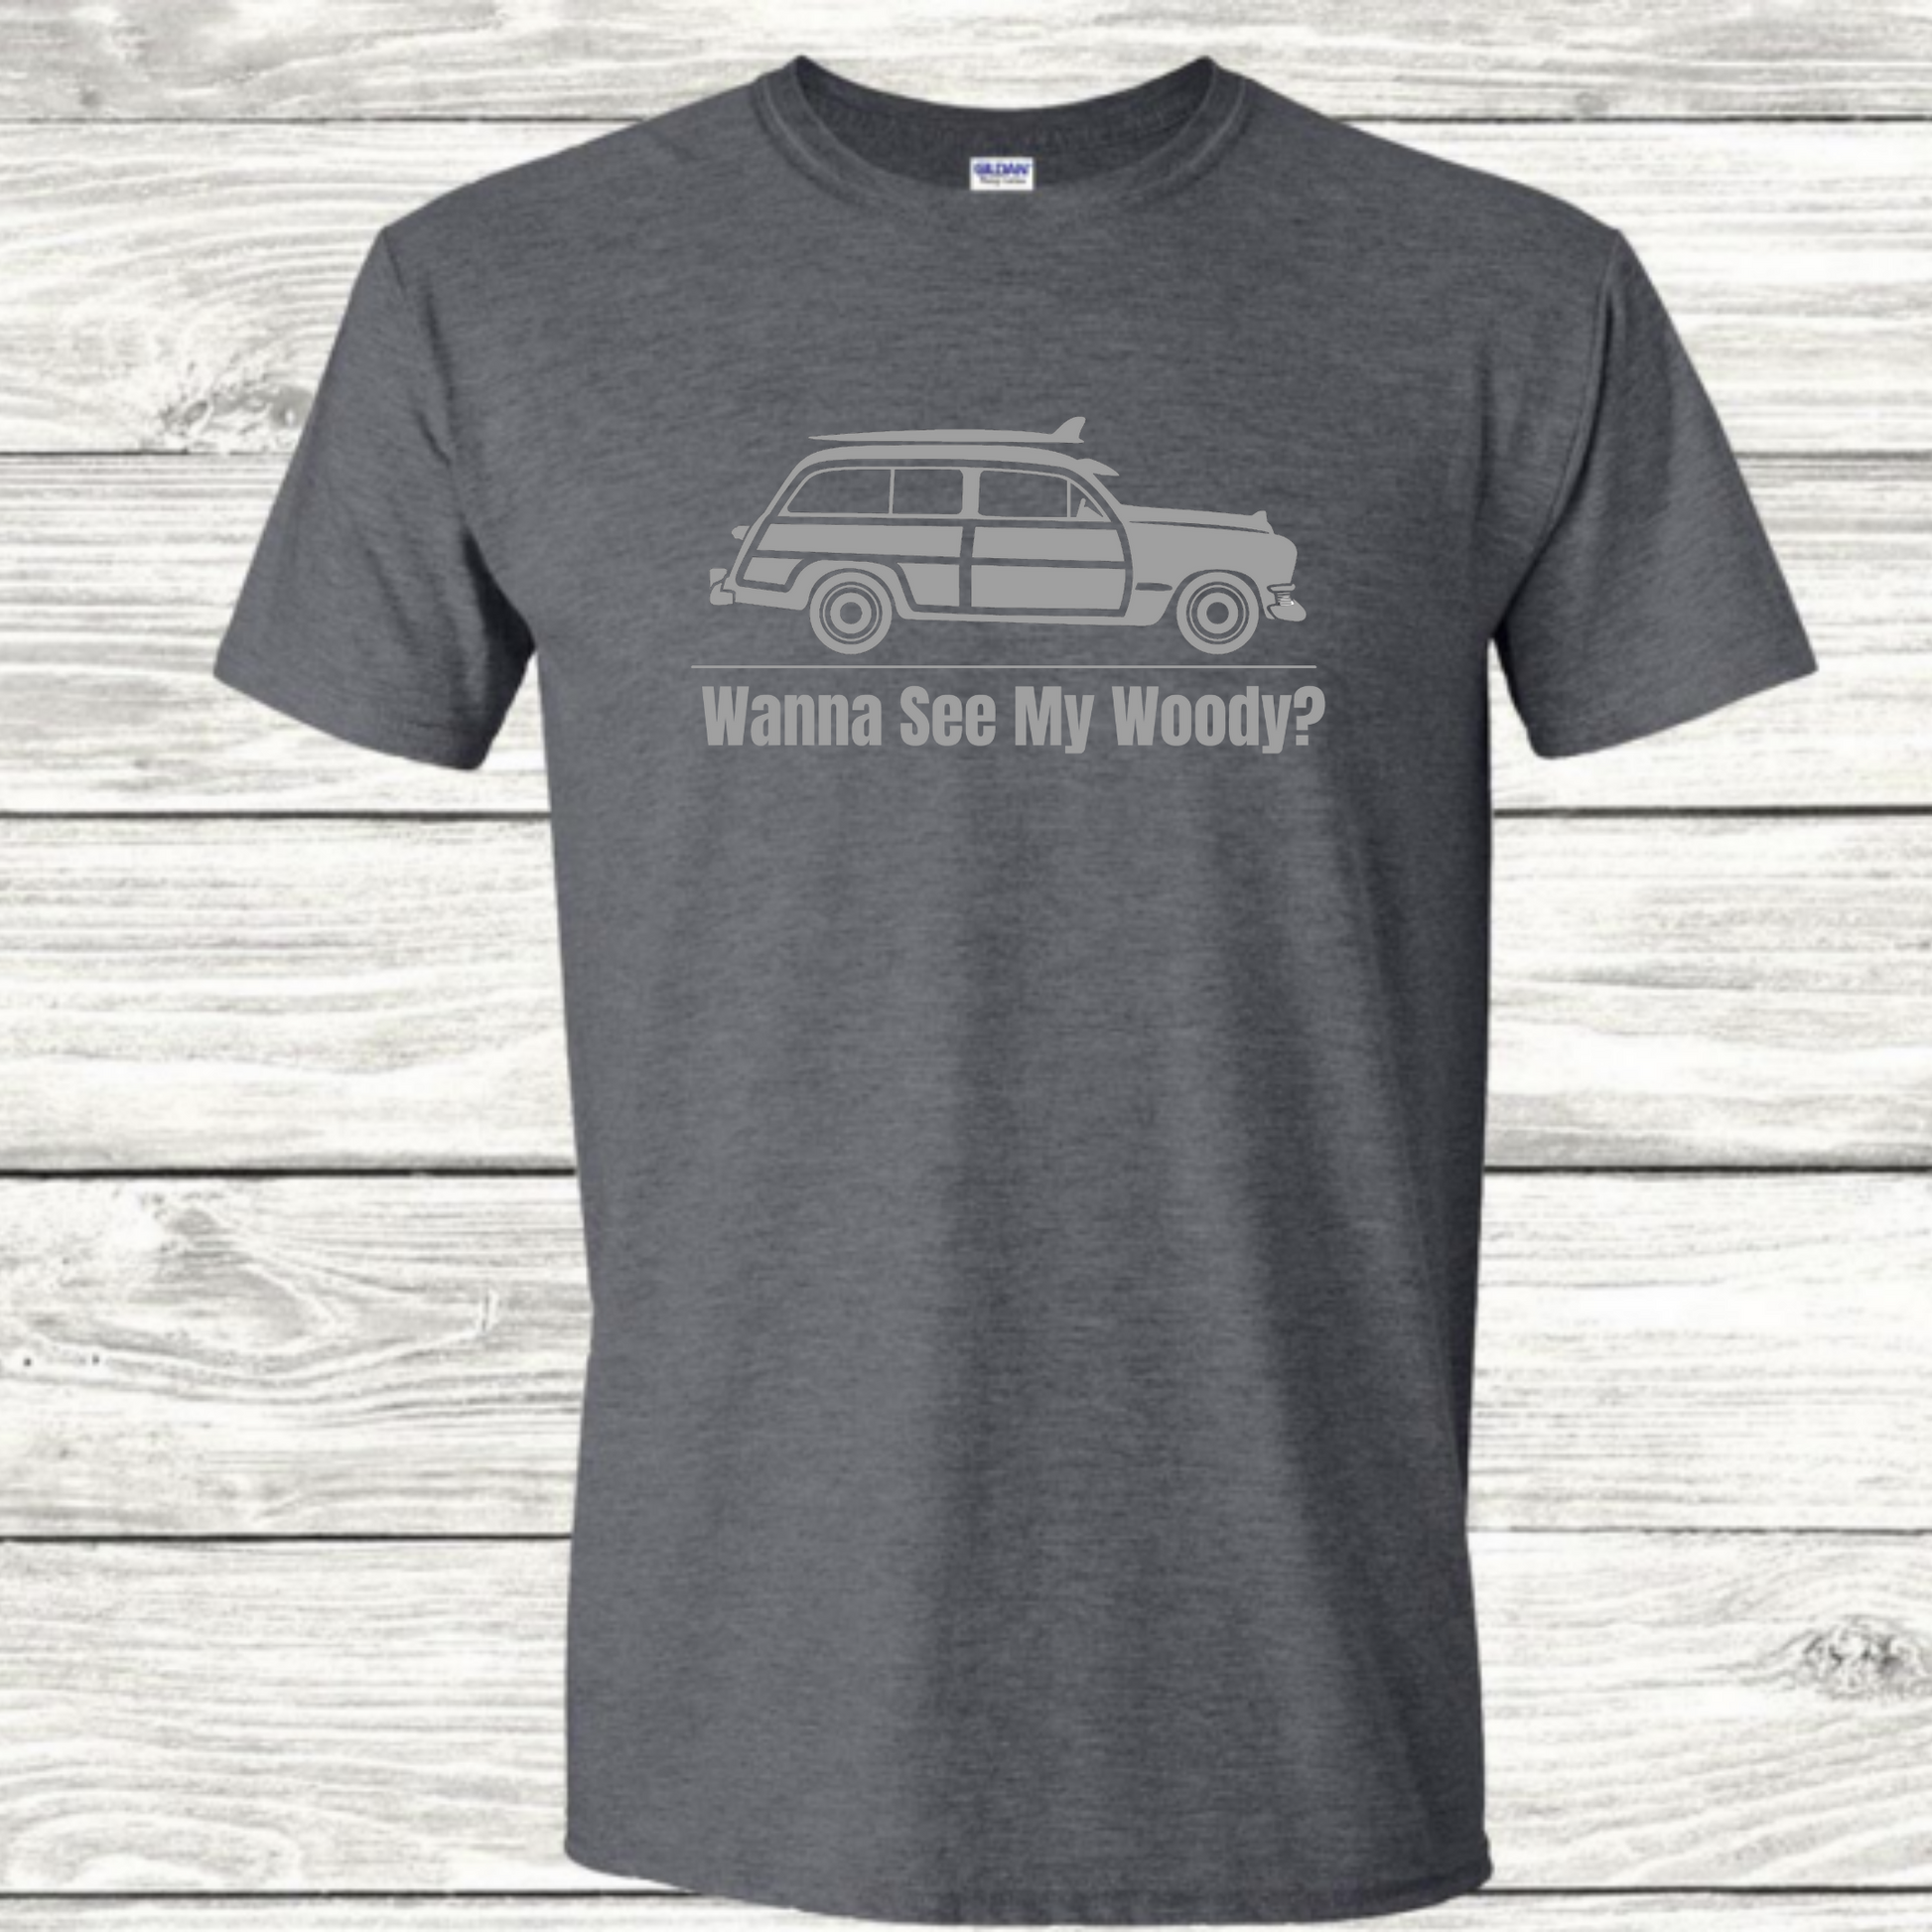 Wanna See My Woody? - Graphic T-Shirt - Mister Snarky's